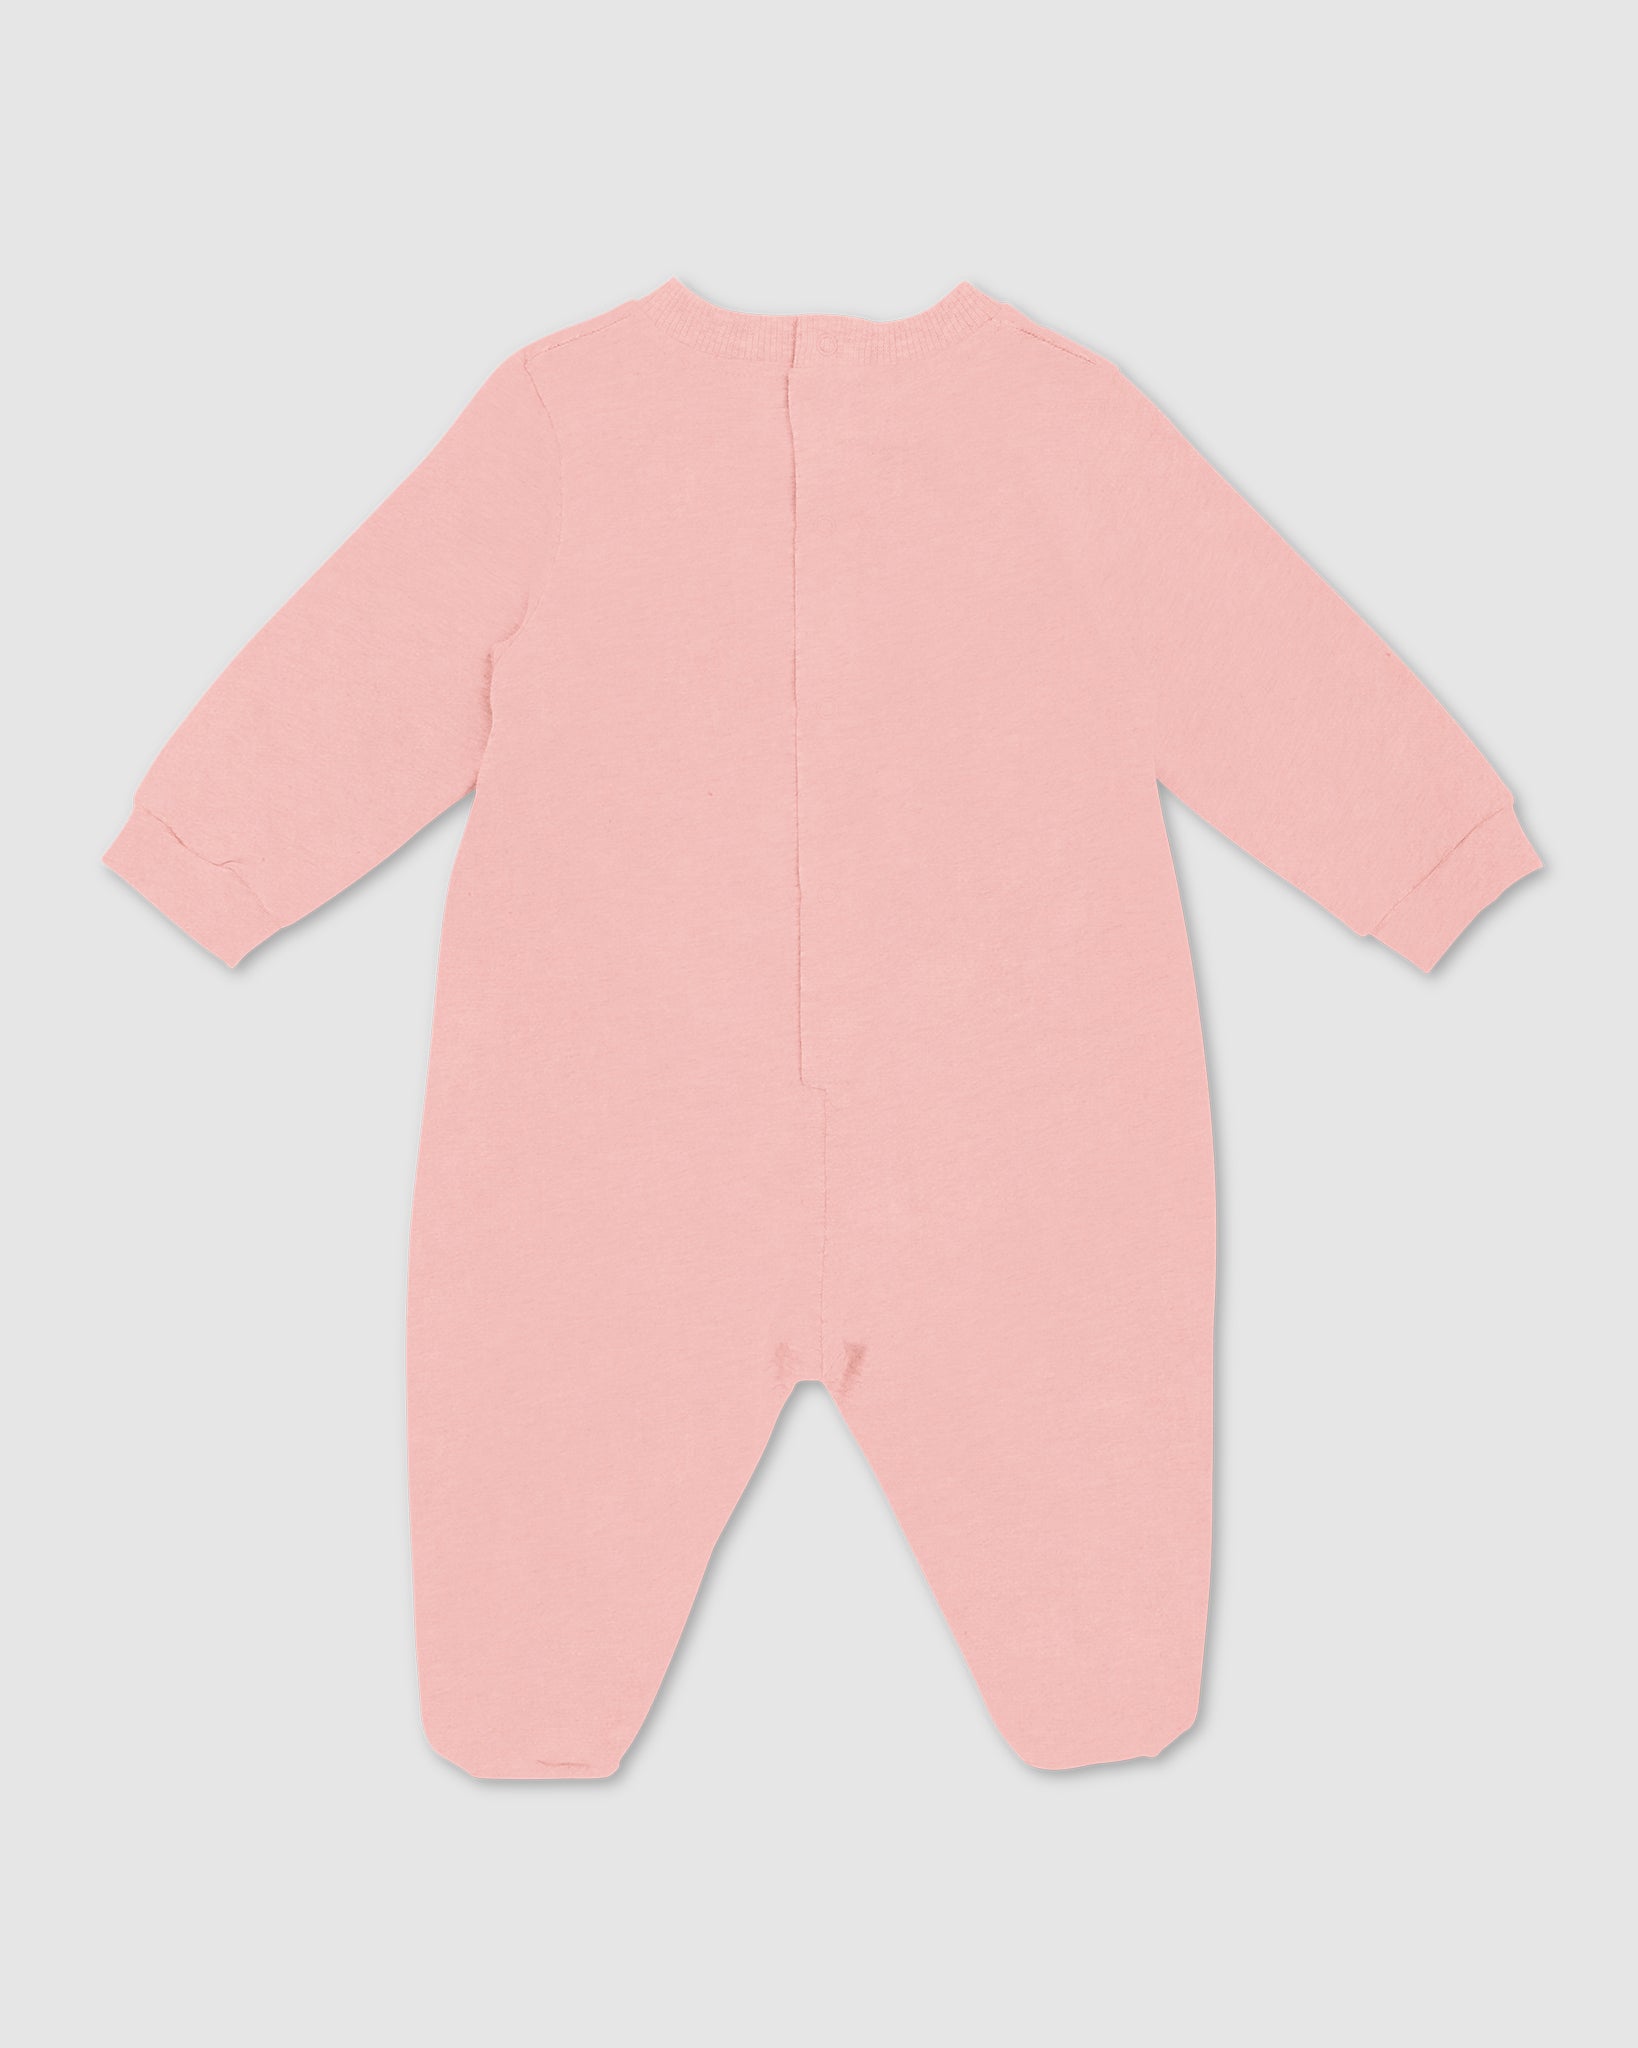 Baby Cherry Playsuit: Girl Playsuits and Gift Set Off White/Pink | GCDS | T-Shirts